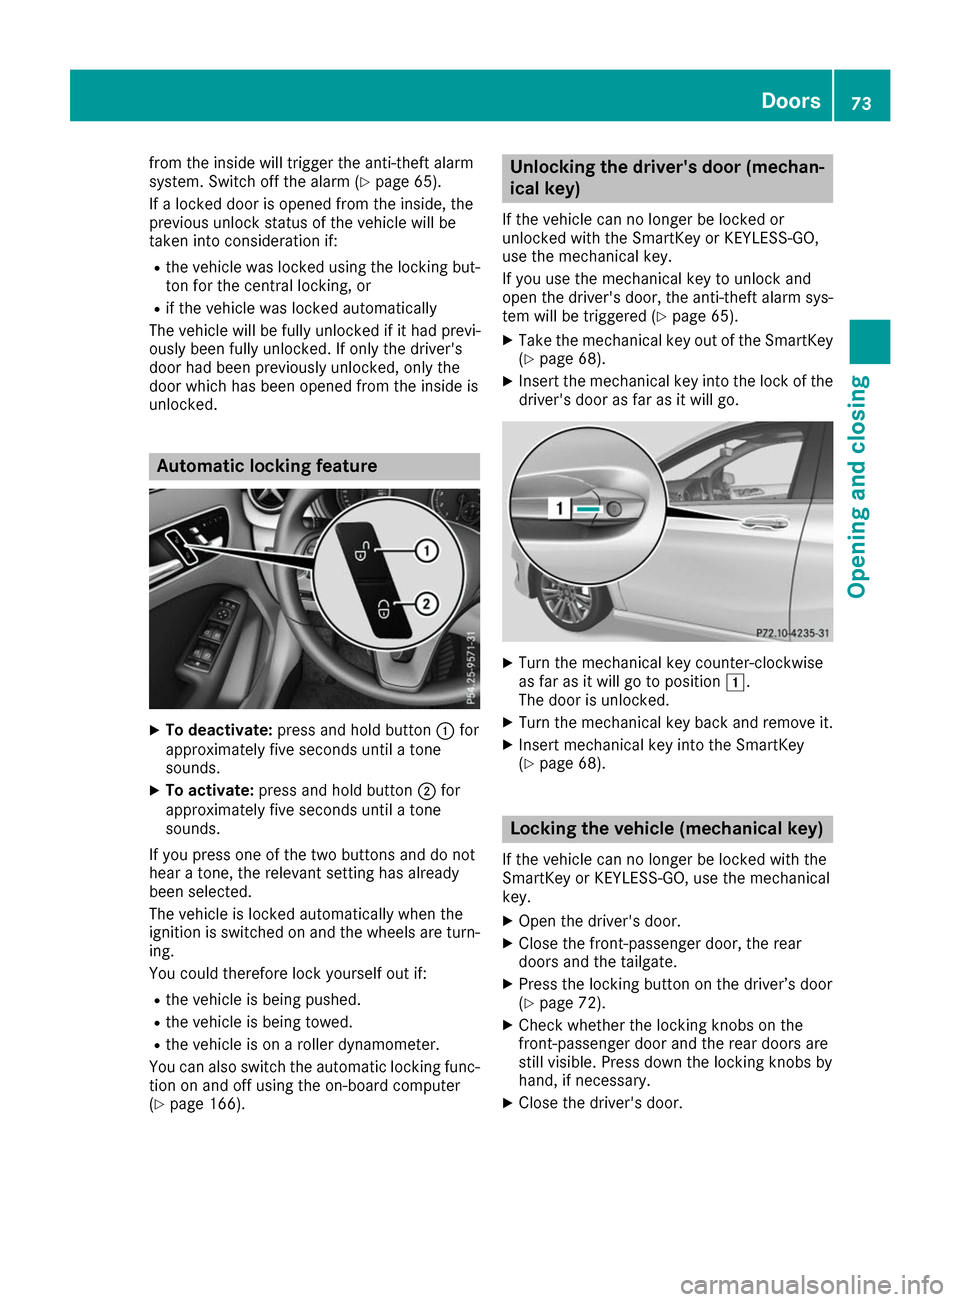 MERCEDES-BENZ B-Class 2017 W246 Manual PDF from the inside will trigger the anti-theft alarm
system. Switch off the alarm (Y page 65).
If a locked door is opened from the inside, the
previous unlock status of the vehicle will be
taken into con